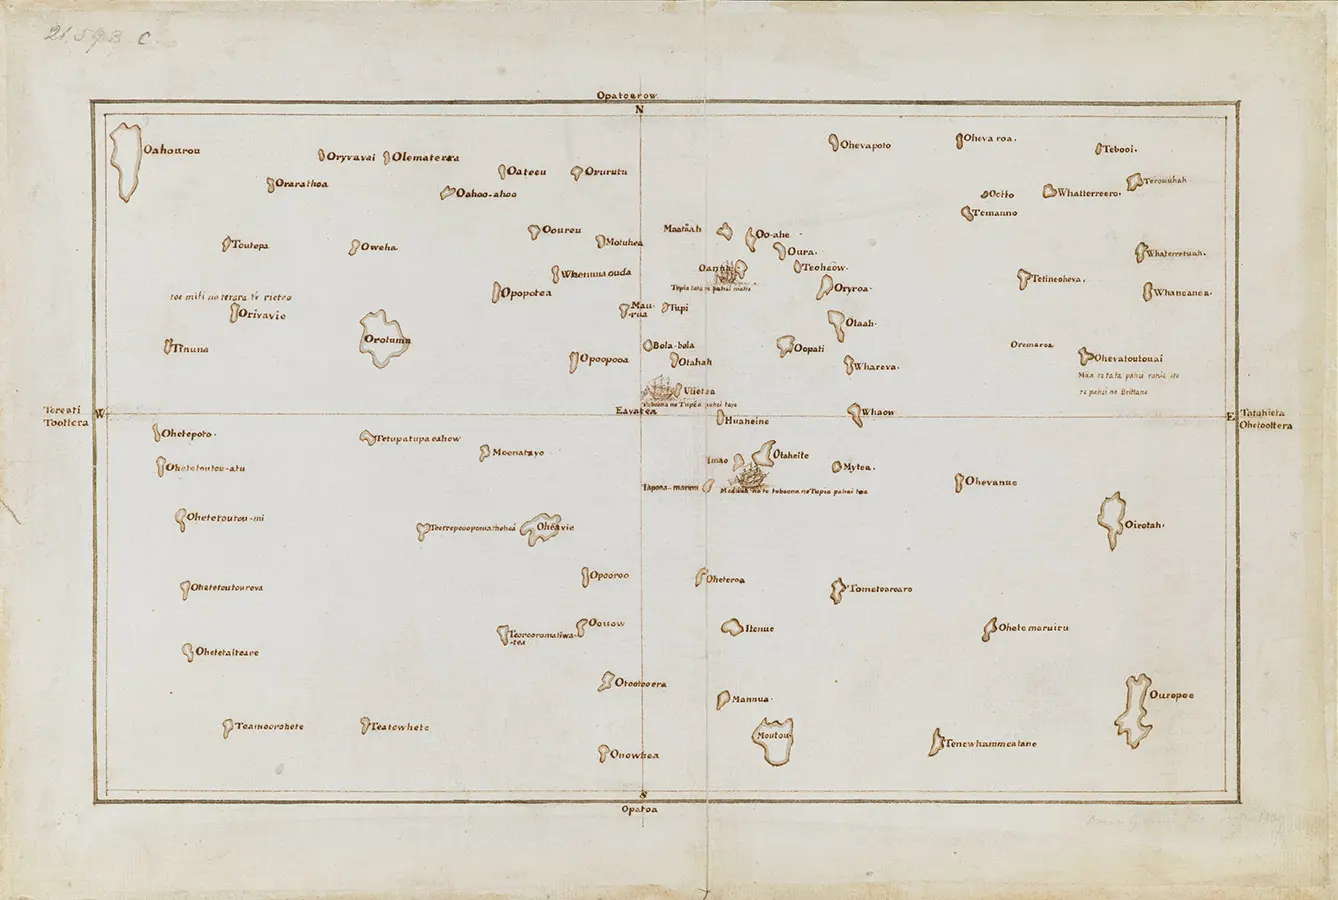 Tupaia's map of the South Pacific in 1769, showing the islands and their names.